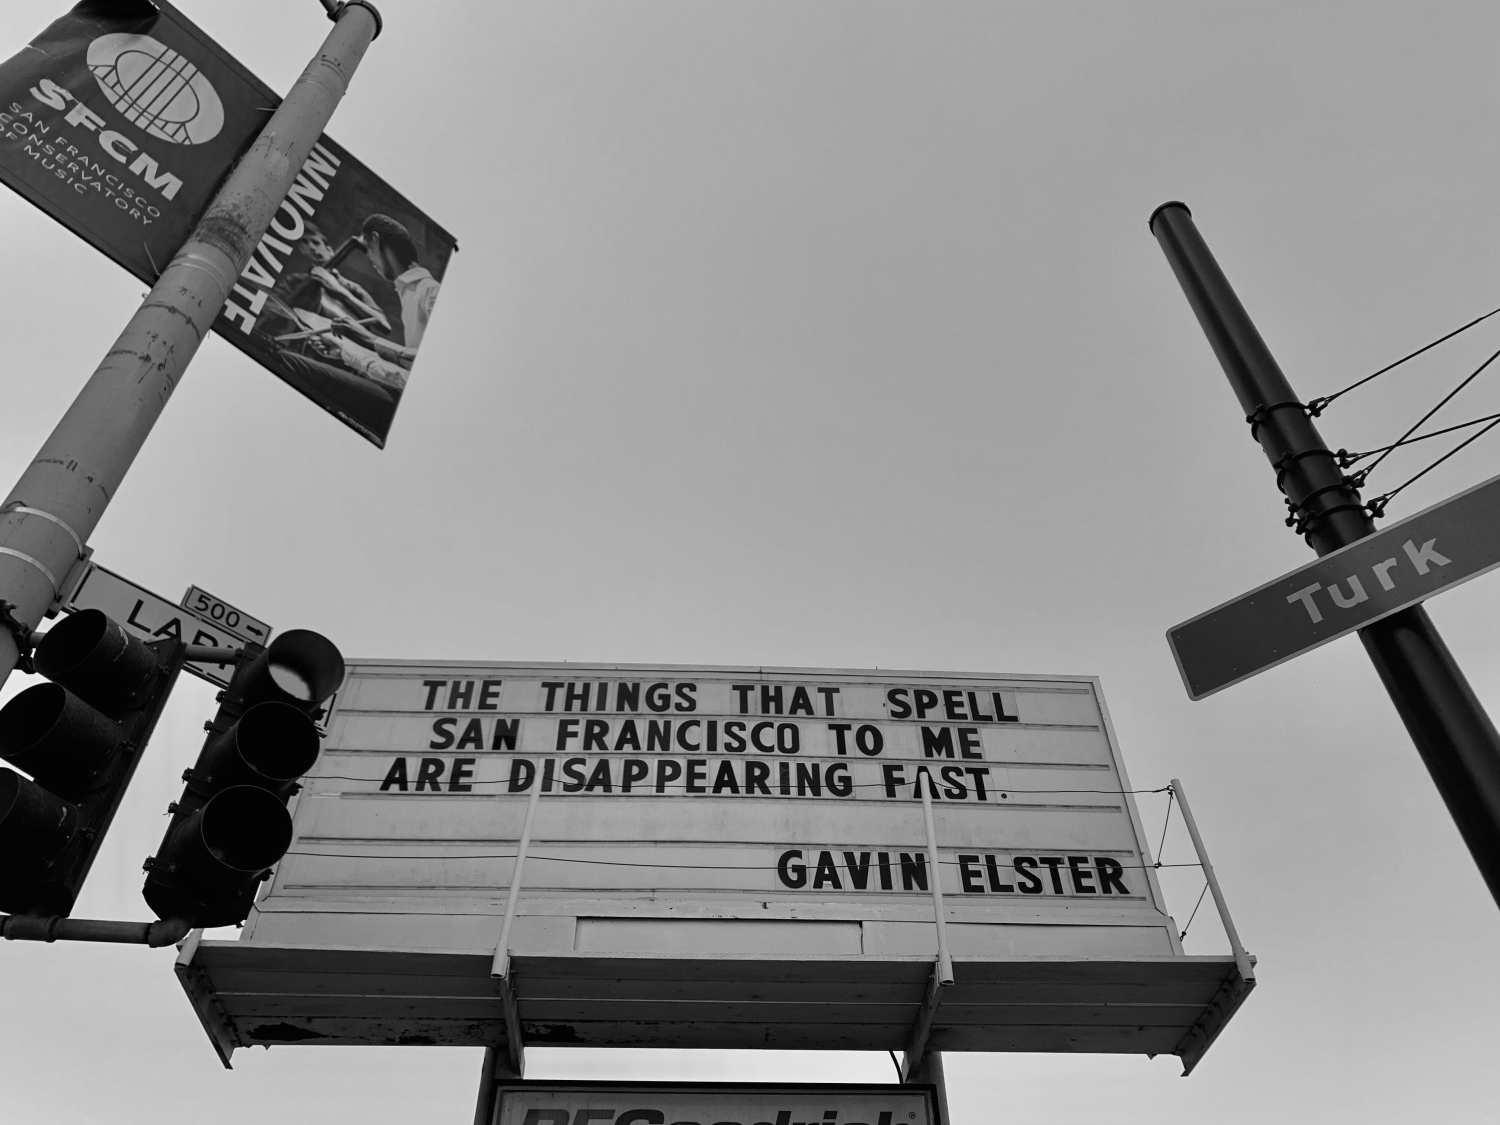 Sign at previous 555 Larkin location that states "The things that spell San Francisco to me are disappearing fast. - Gavin Elster"